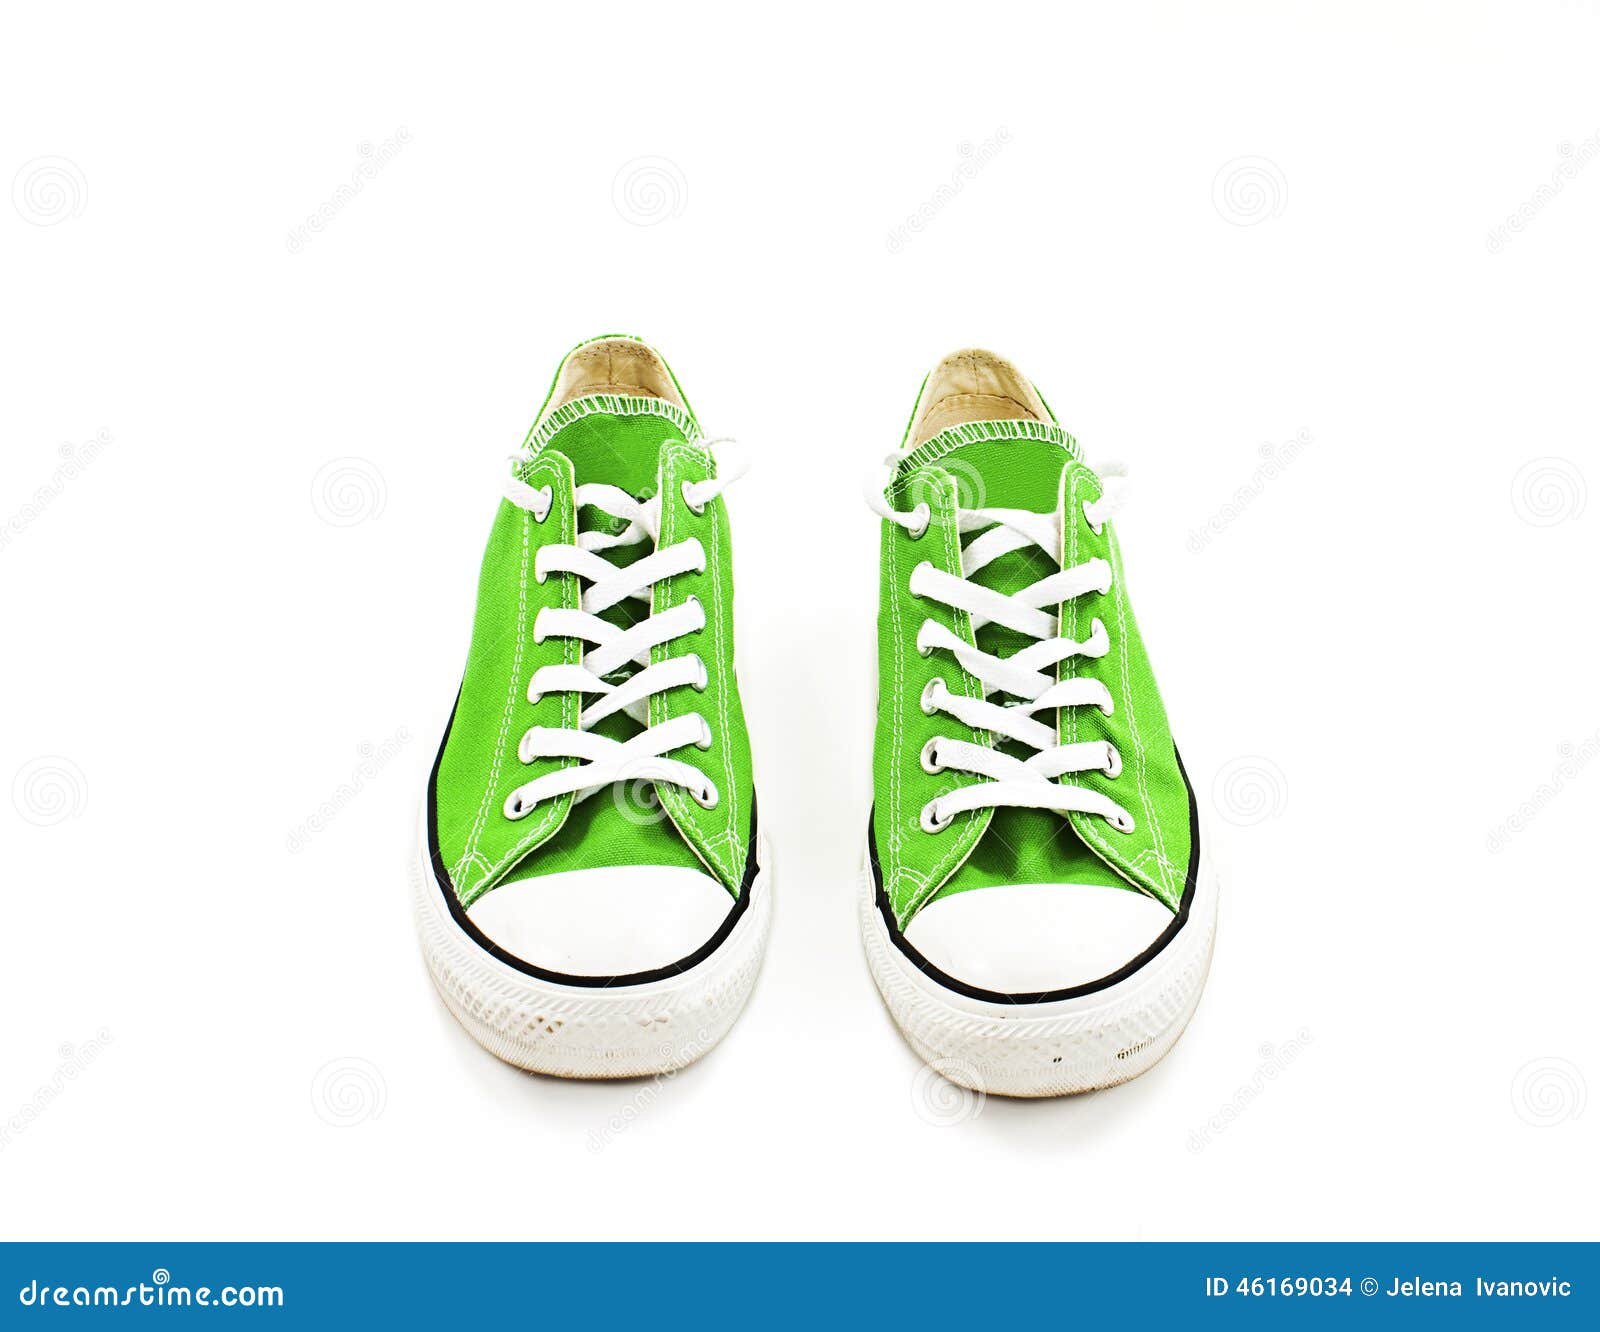 Vintage green shoes stock photo. Image of high, fashion - 46169034